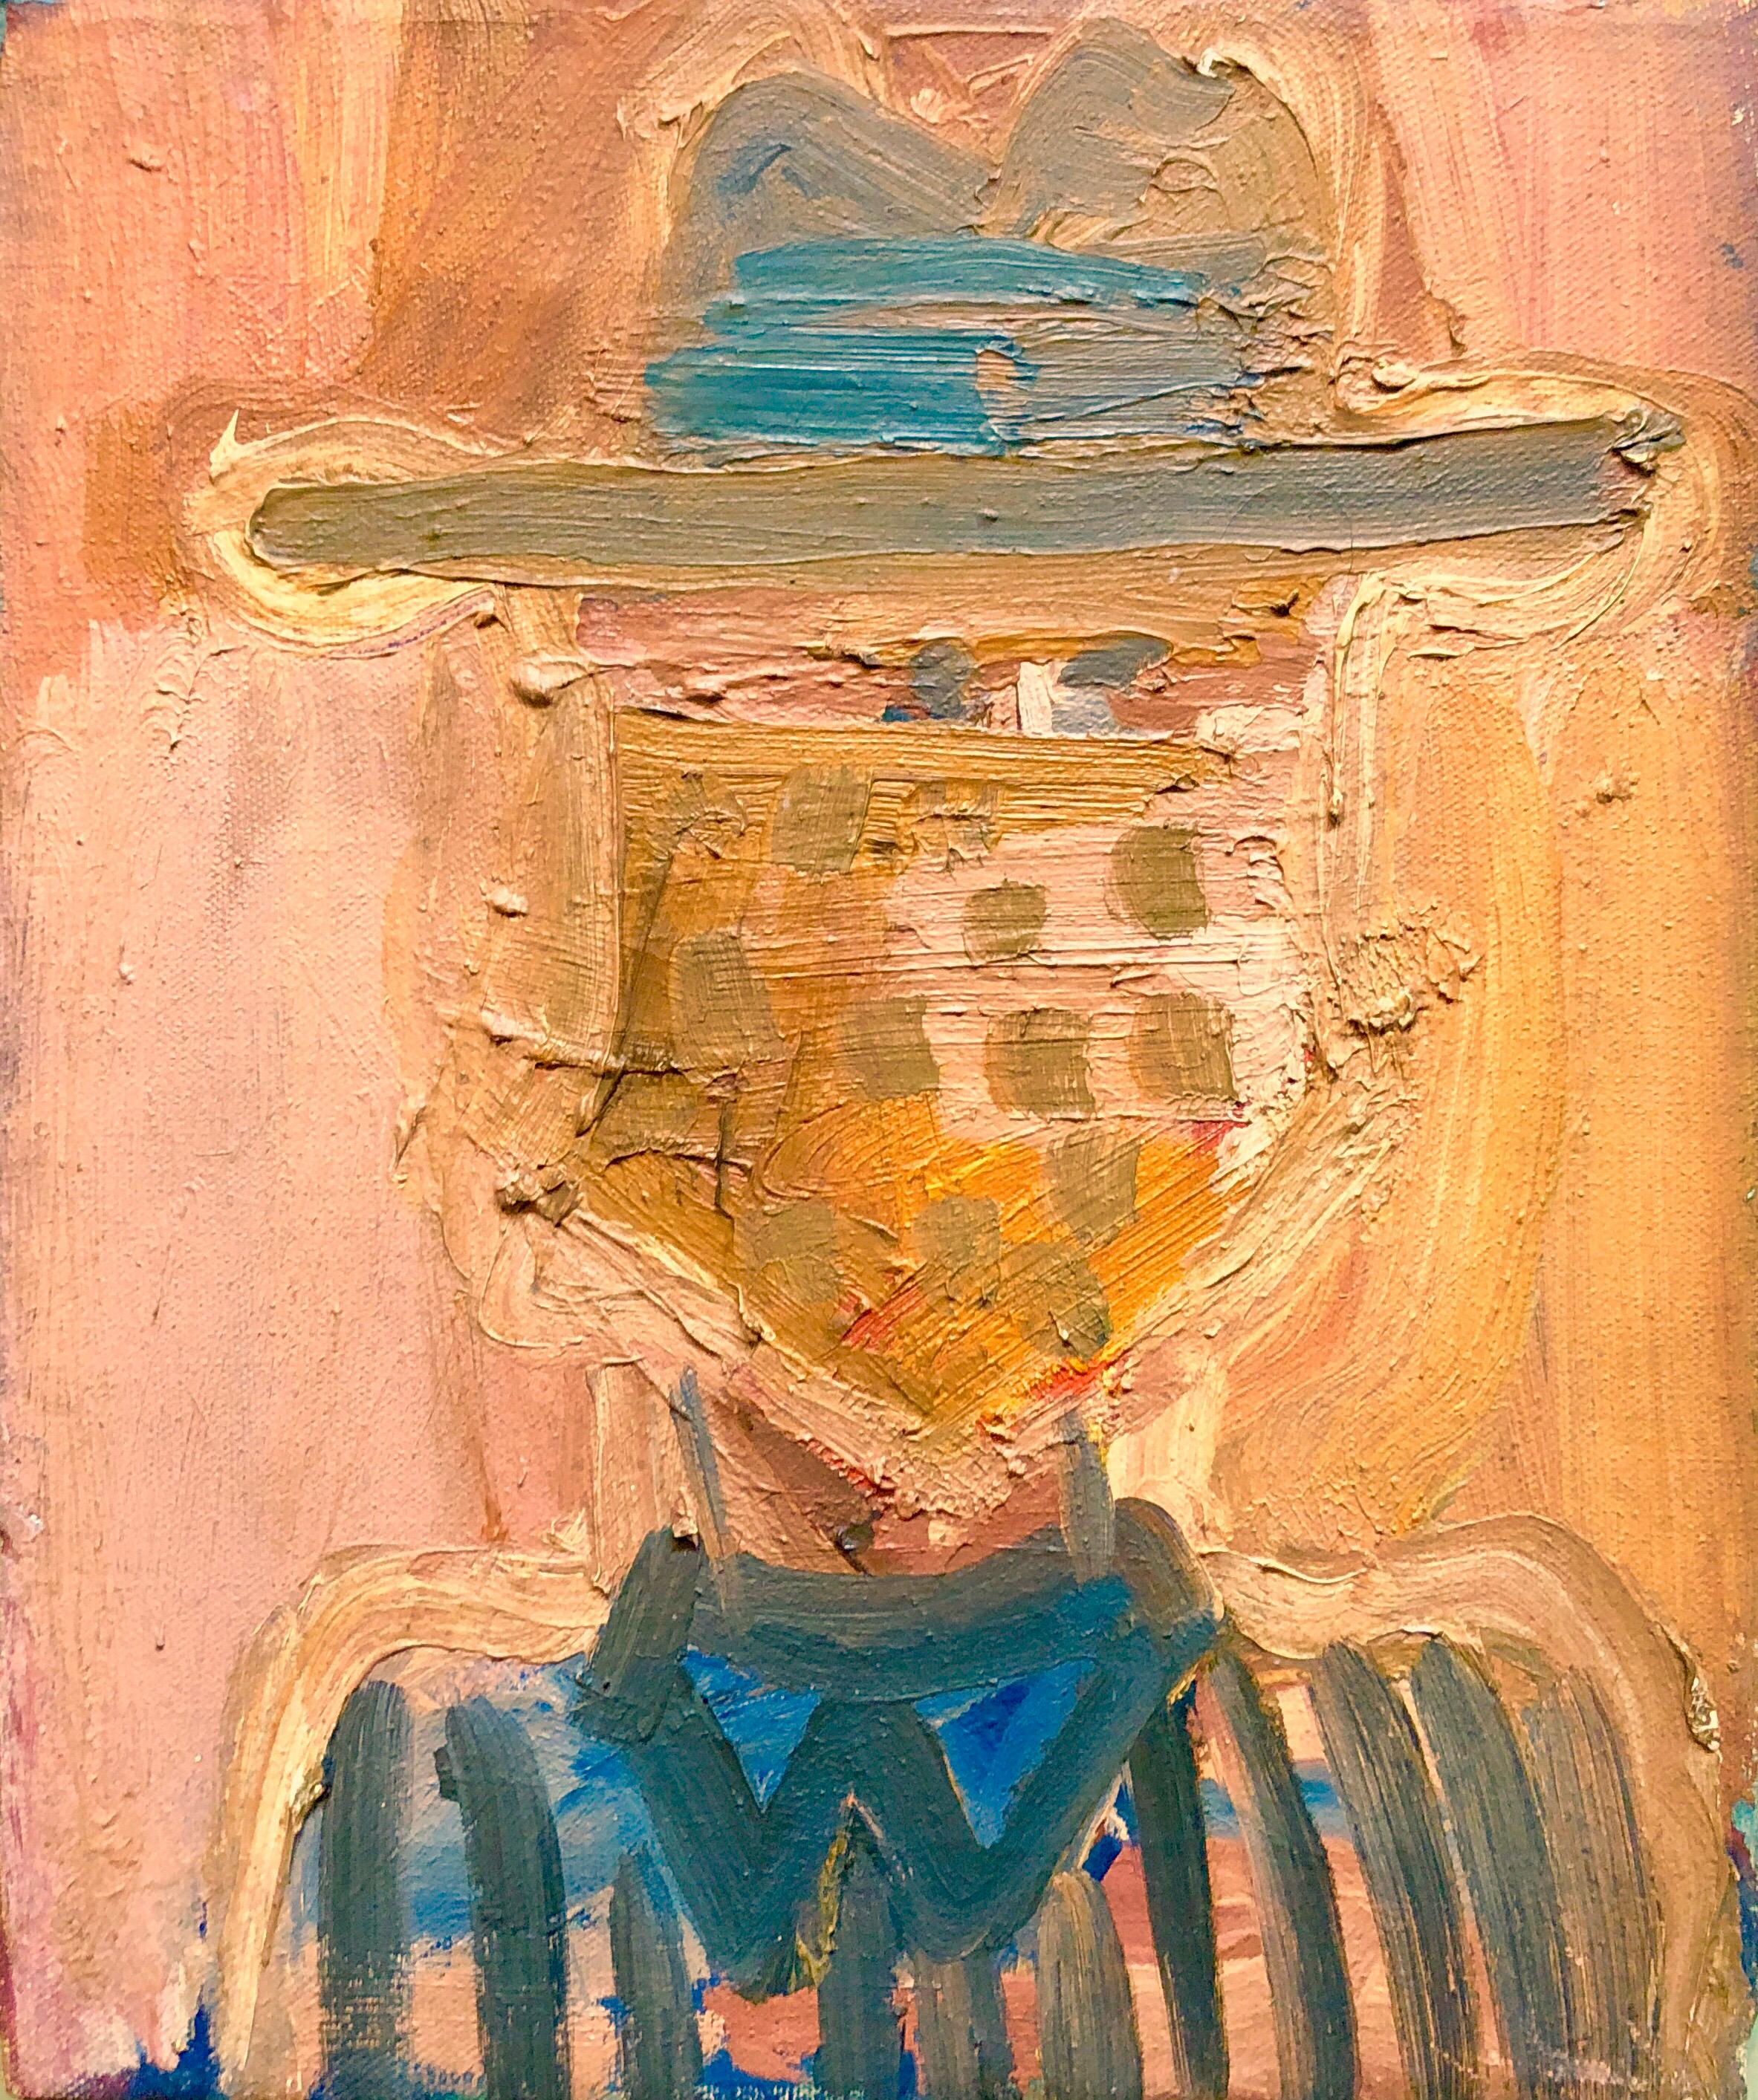 1 of 2 portraits we have available, 1 of man, a cowboy. (the last photo of cowboy and nurse is just for illustration purposes. this sale is just for the cowboy. the nurse is being offered seperately)
Patricia Hermine Sloane, PhD (1934 – 2001) also